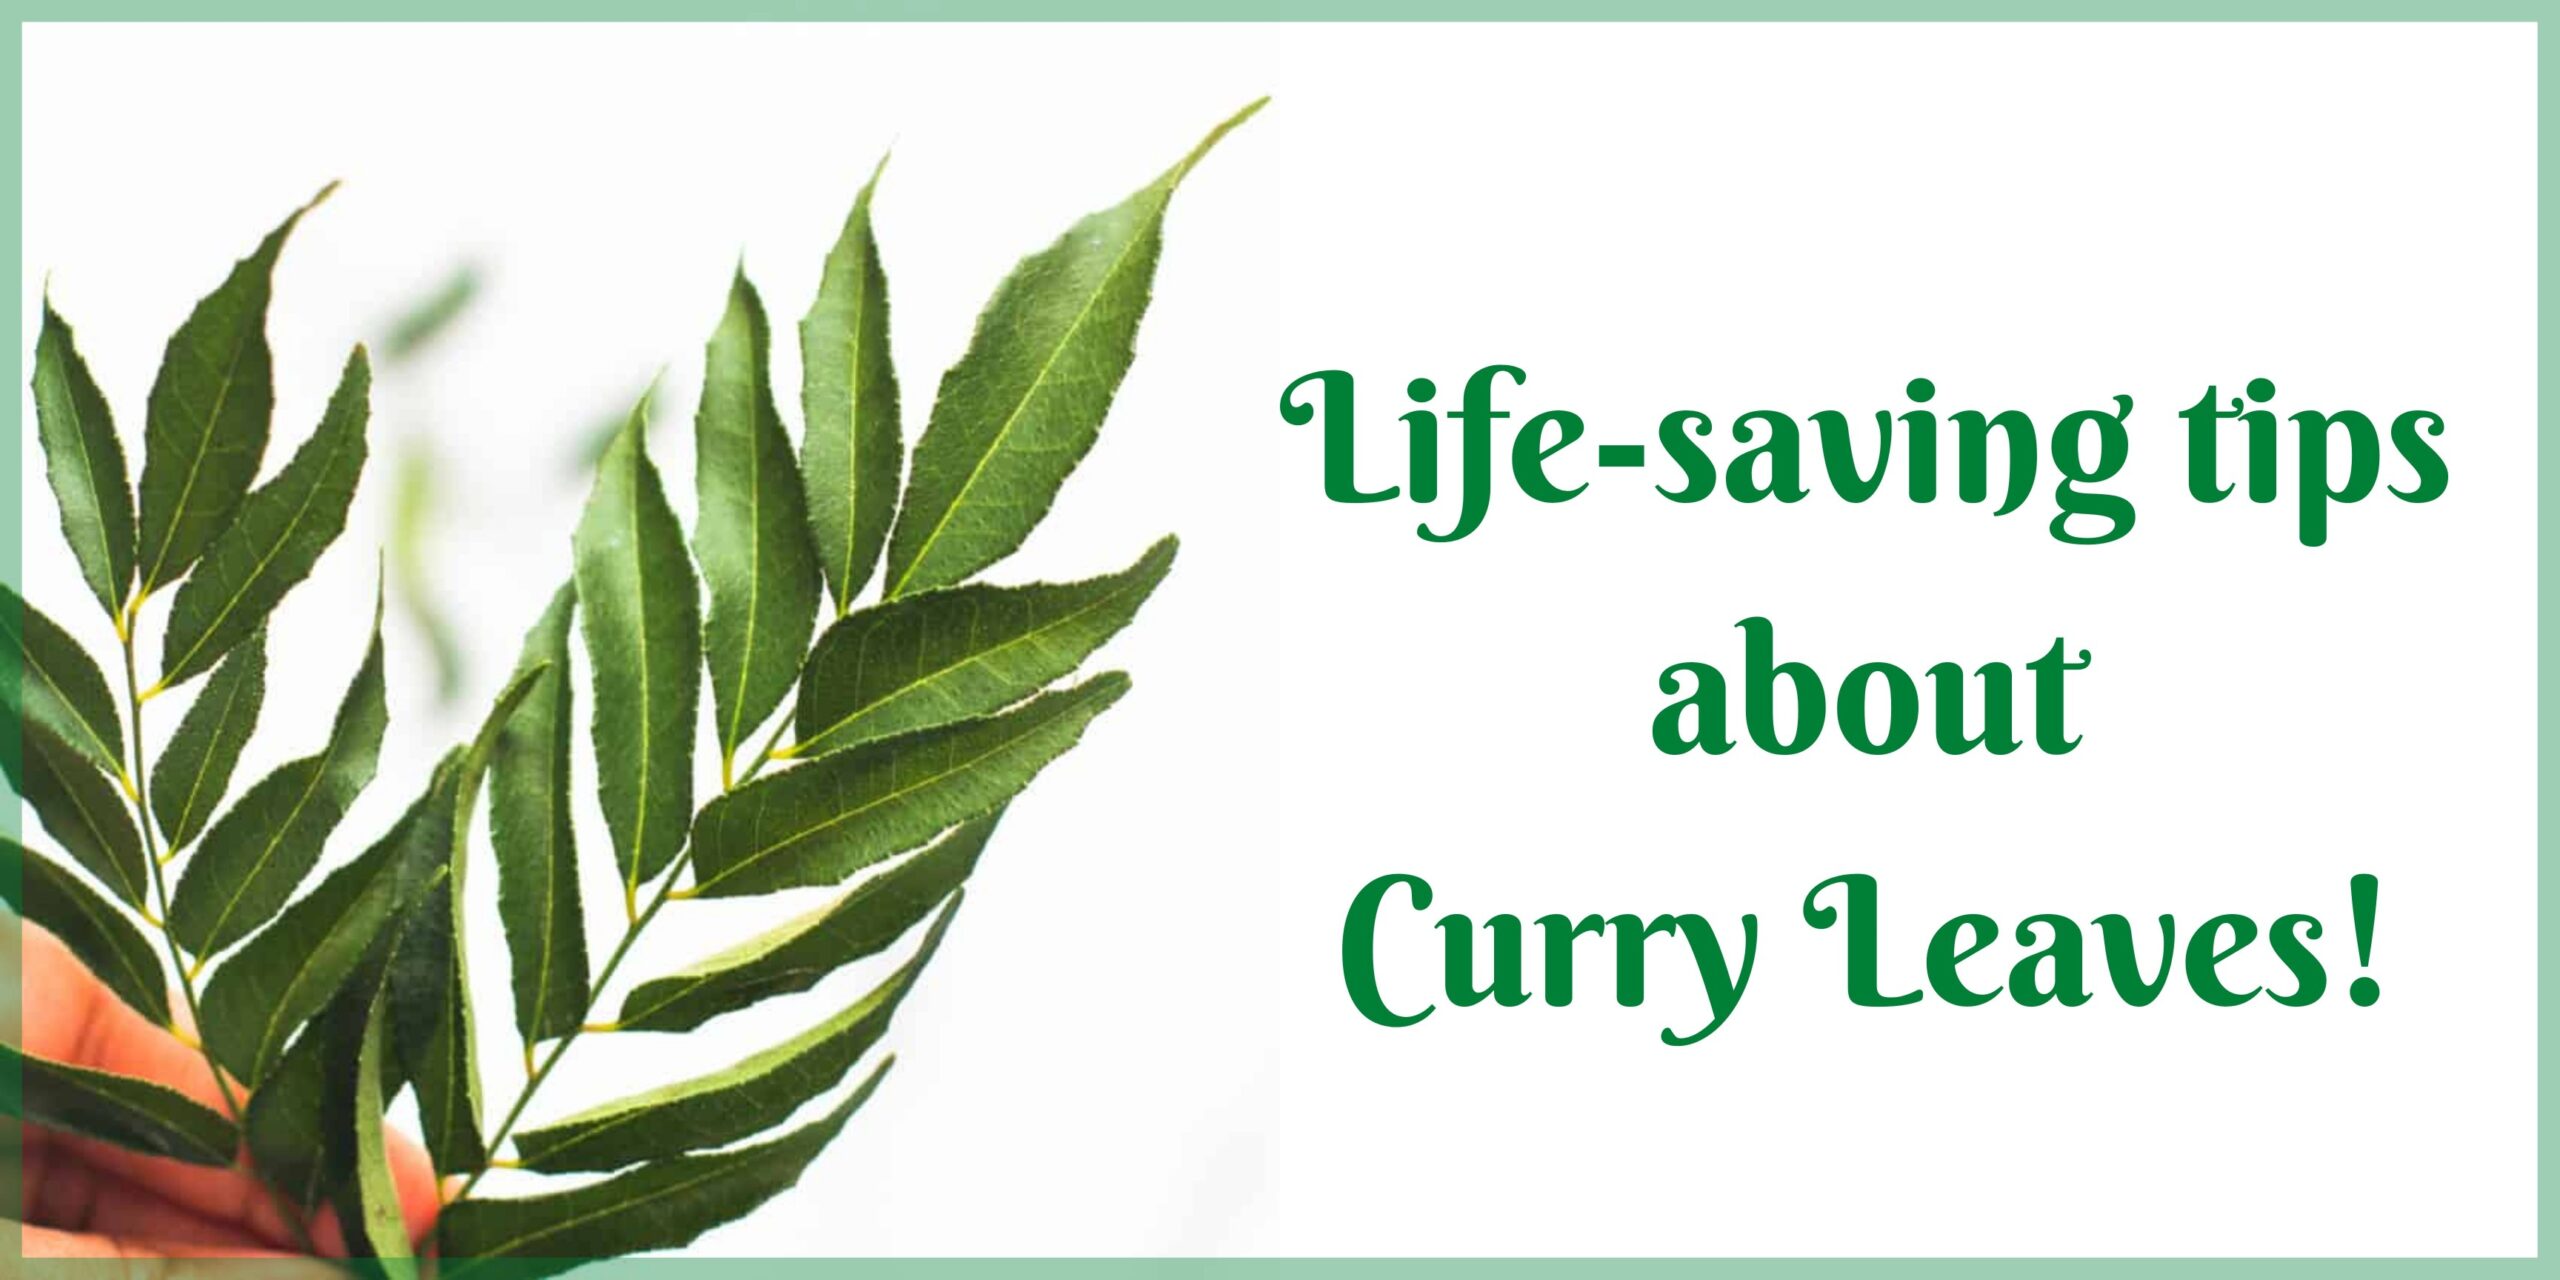 Life-saving tips about Curry leaves! - Uyir Organic Farmers Market